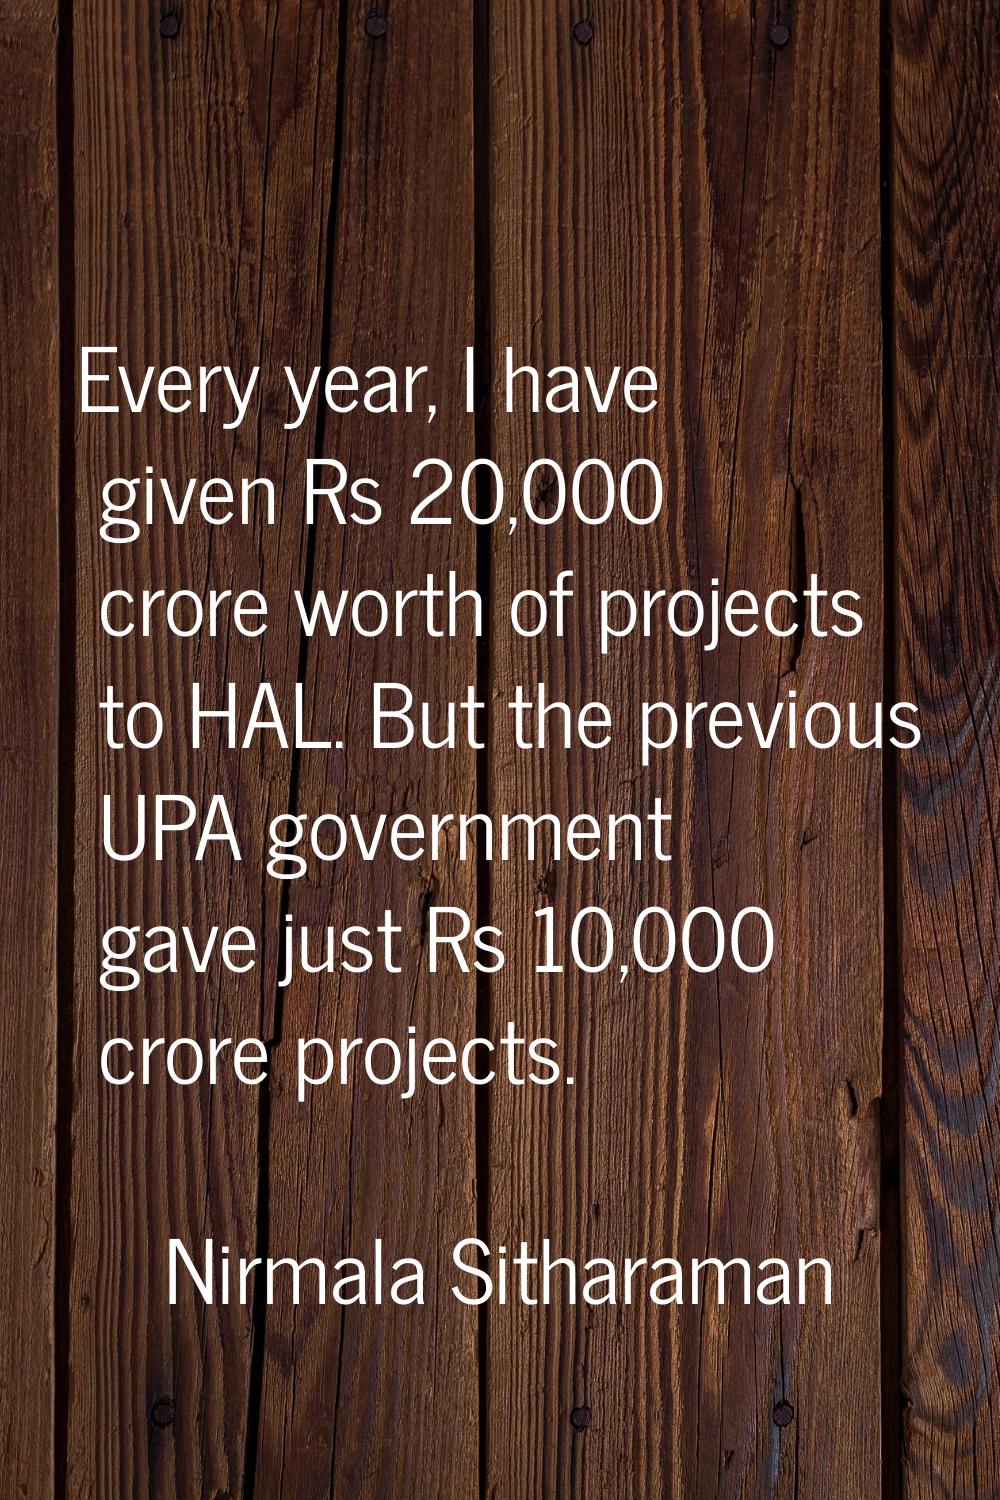 Every year, I have given Rs 20,000 crore worth of projects to HAL. But the previous UPA government 